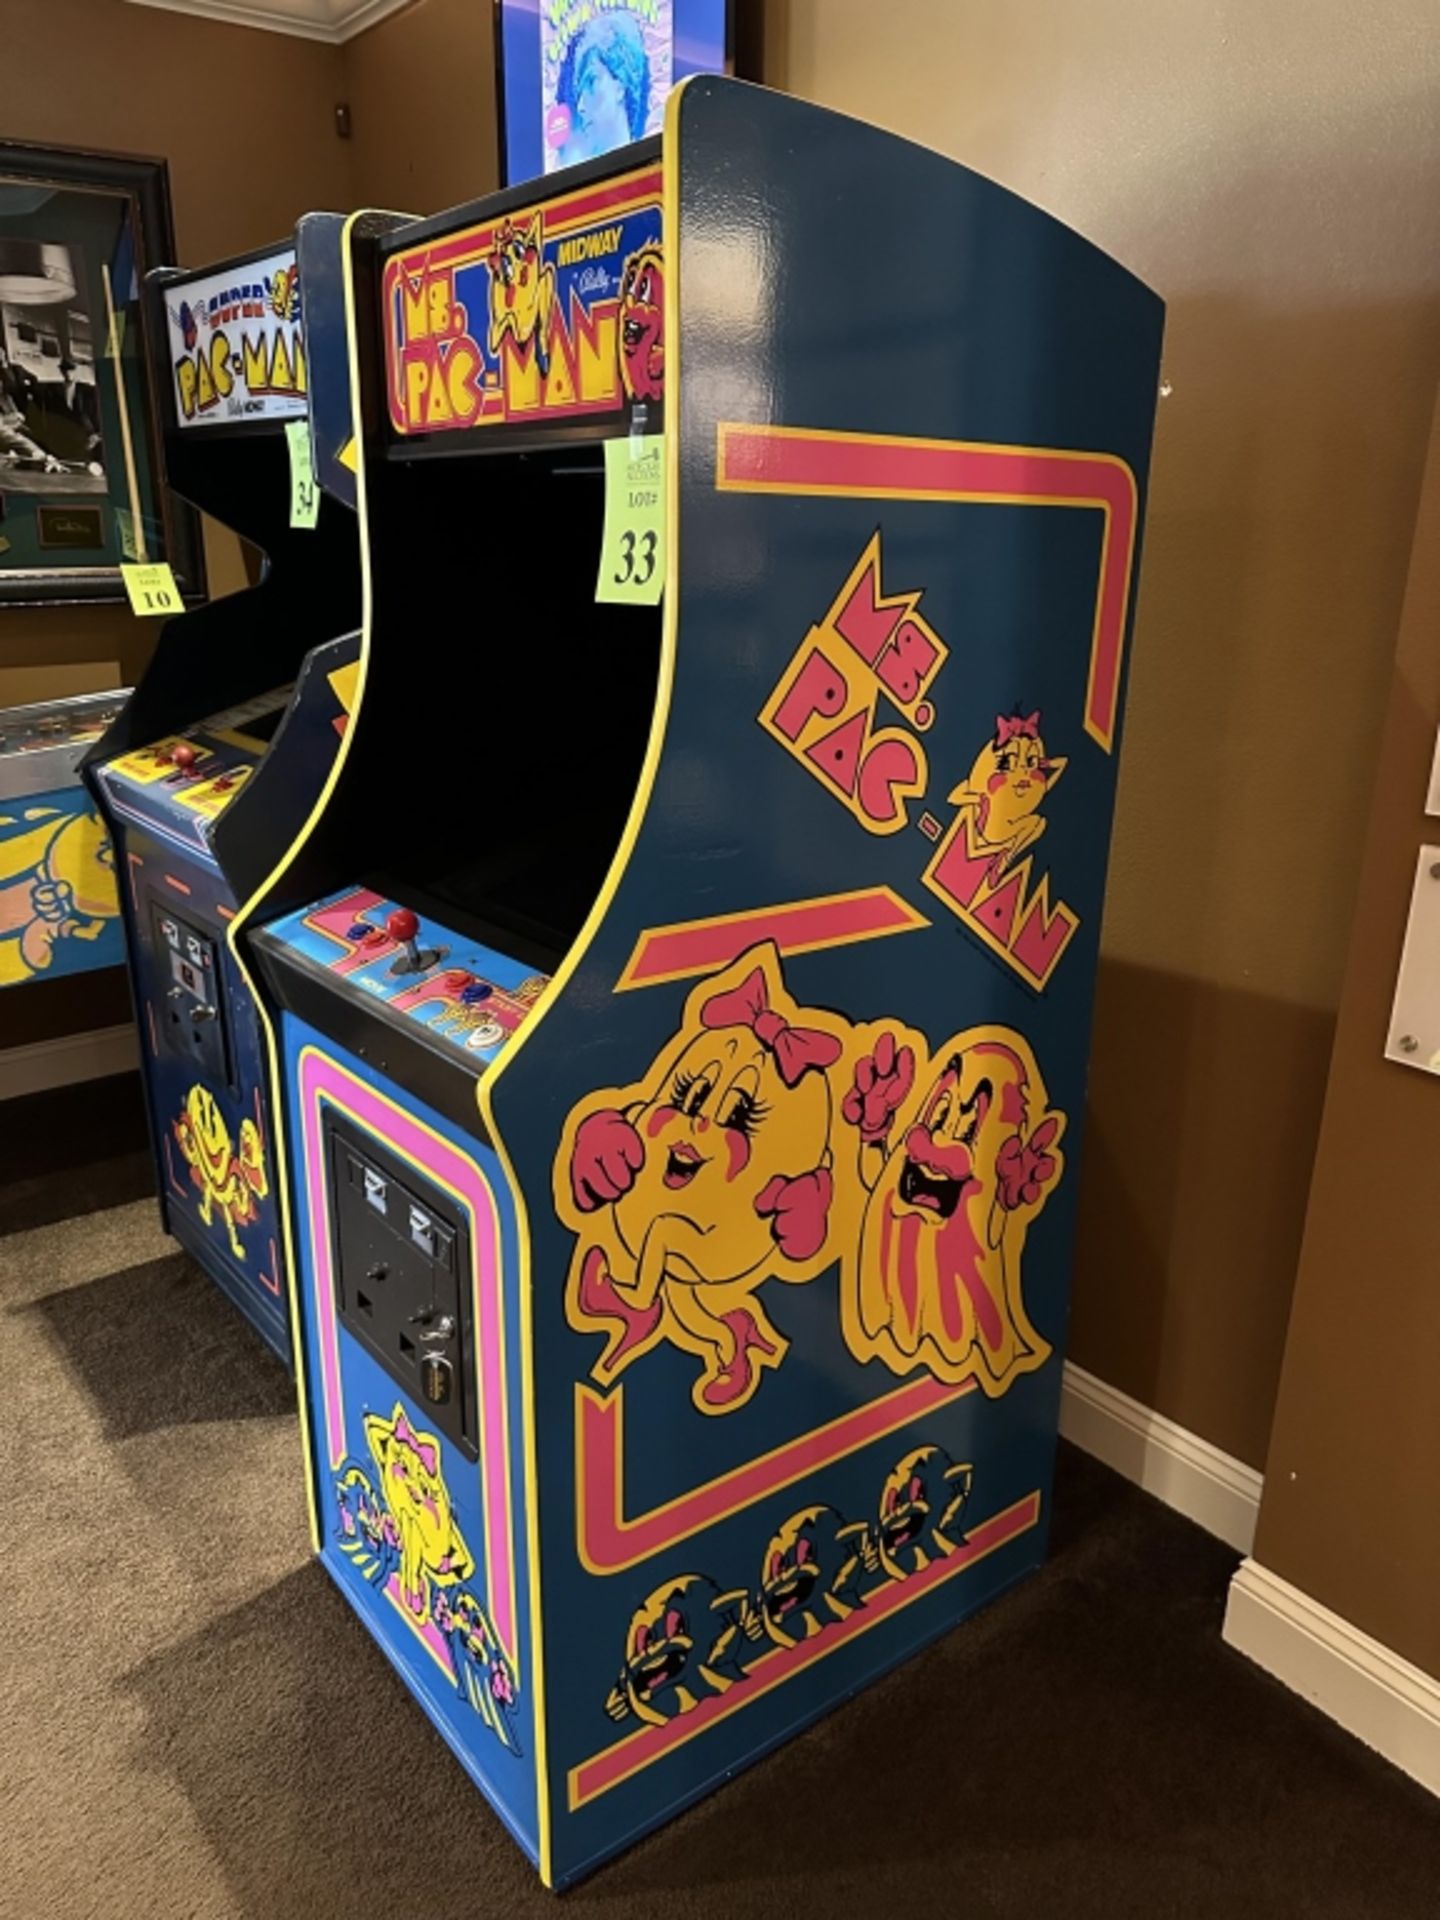 MS. PAC-MAN FULL SIZE MULTIGAME PLAYS 60 GAMES! - Image 2 of 2